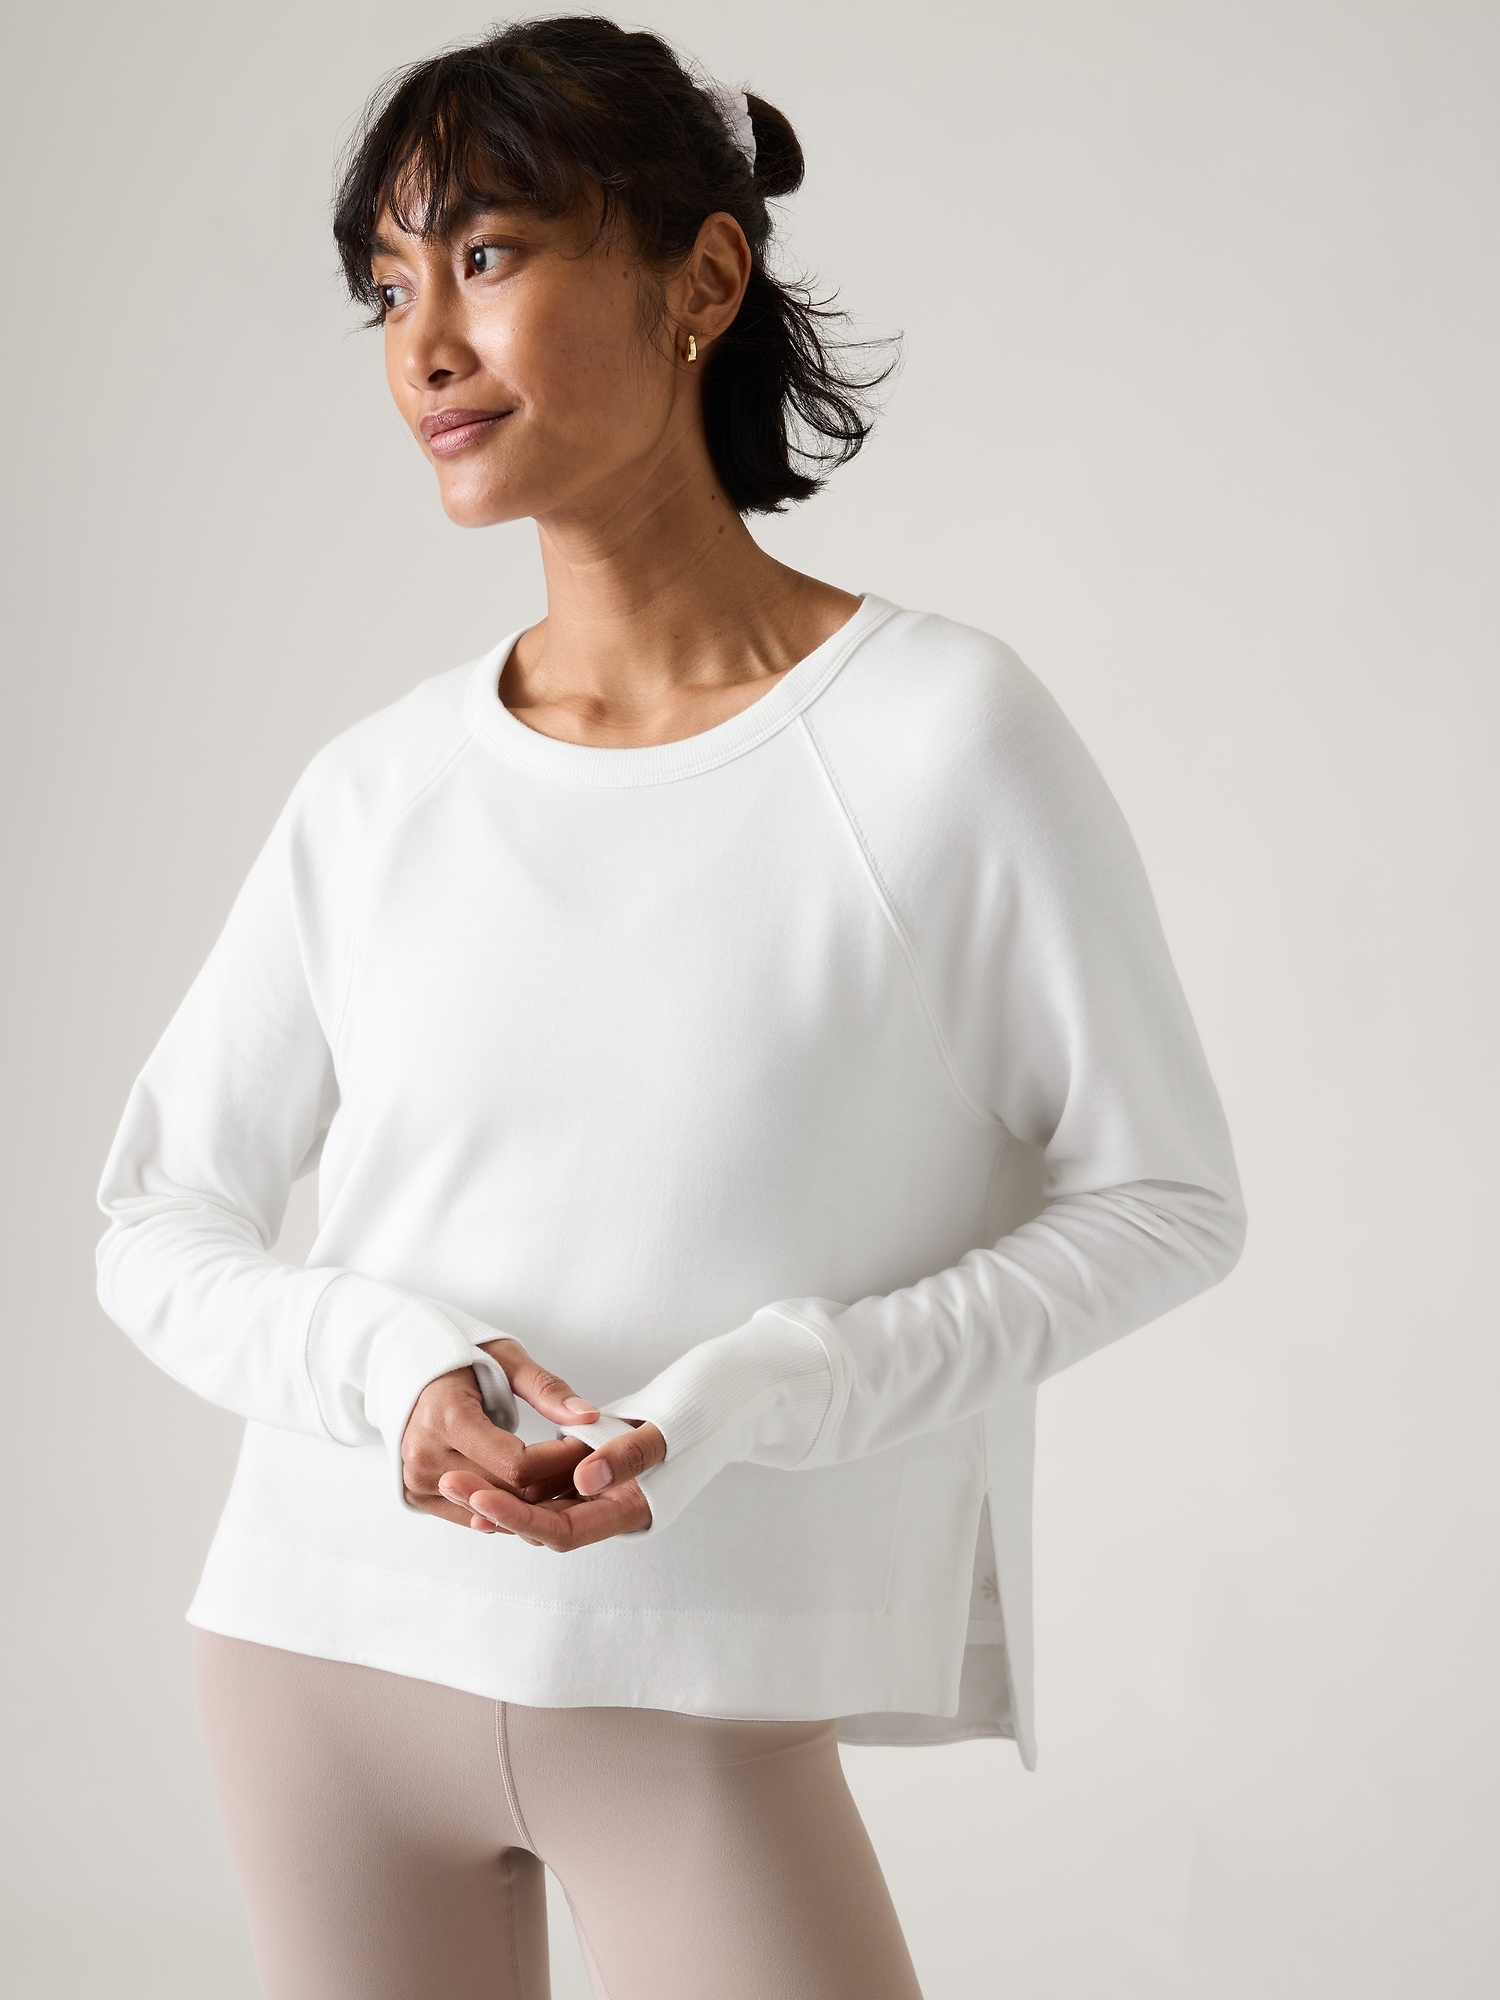 Athleta Coaster Luxe Recover High Hip Sweatshirt In Bright White